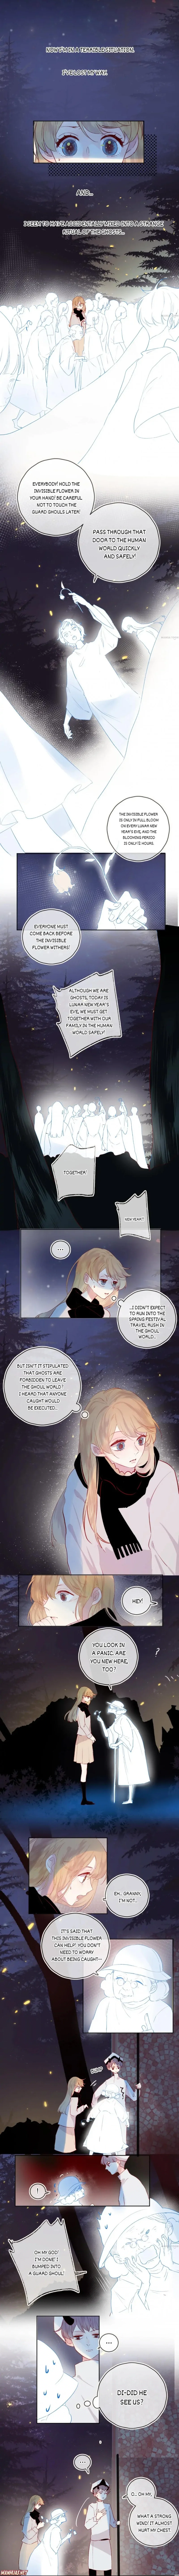 Flowers In The Secret Place - Page 1